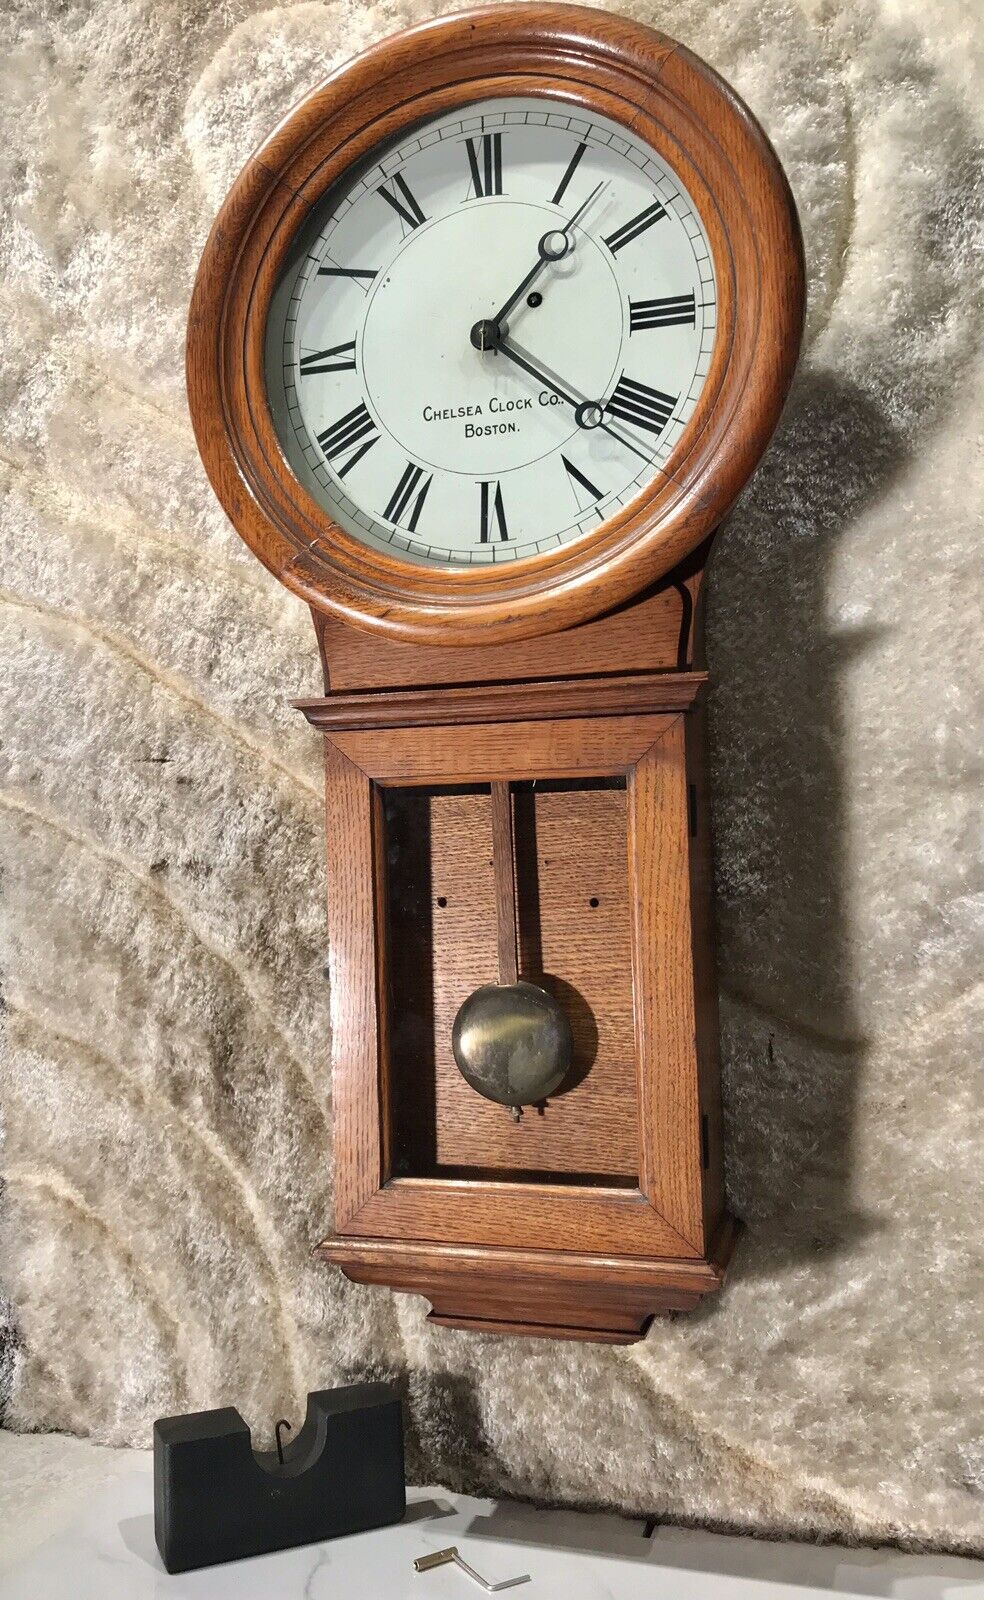 ORIGINAL ANTIQUE U.S.A.CHELSEA CLOCK,CO,BOSTON,WITH WEIGHT DRIVIN